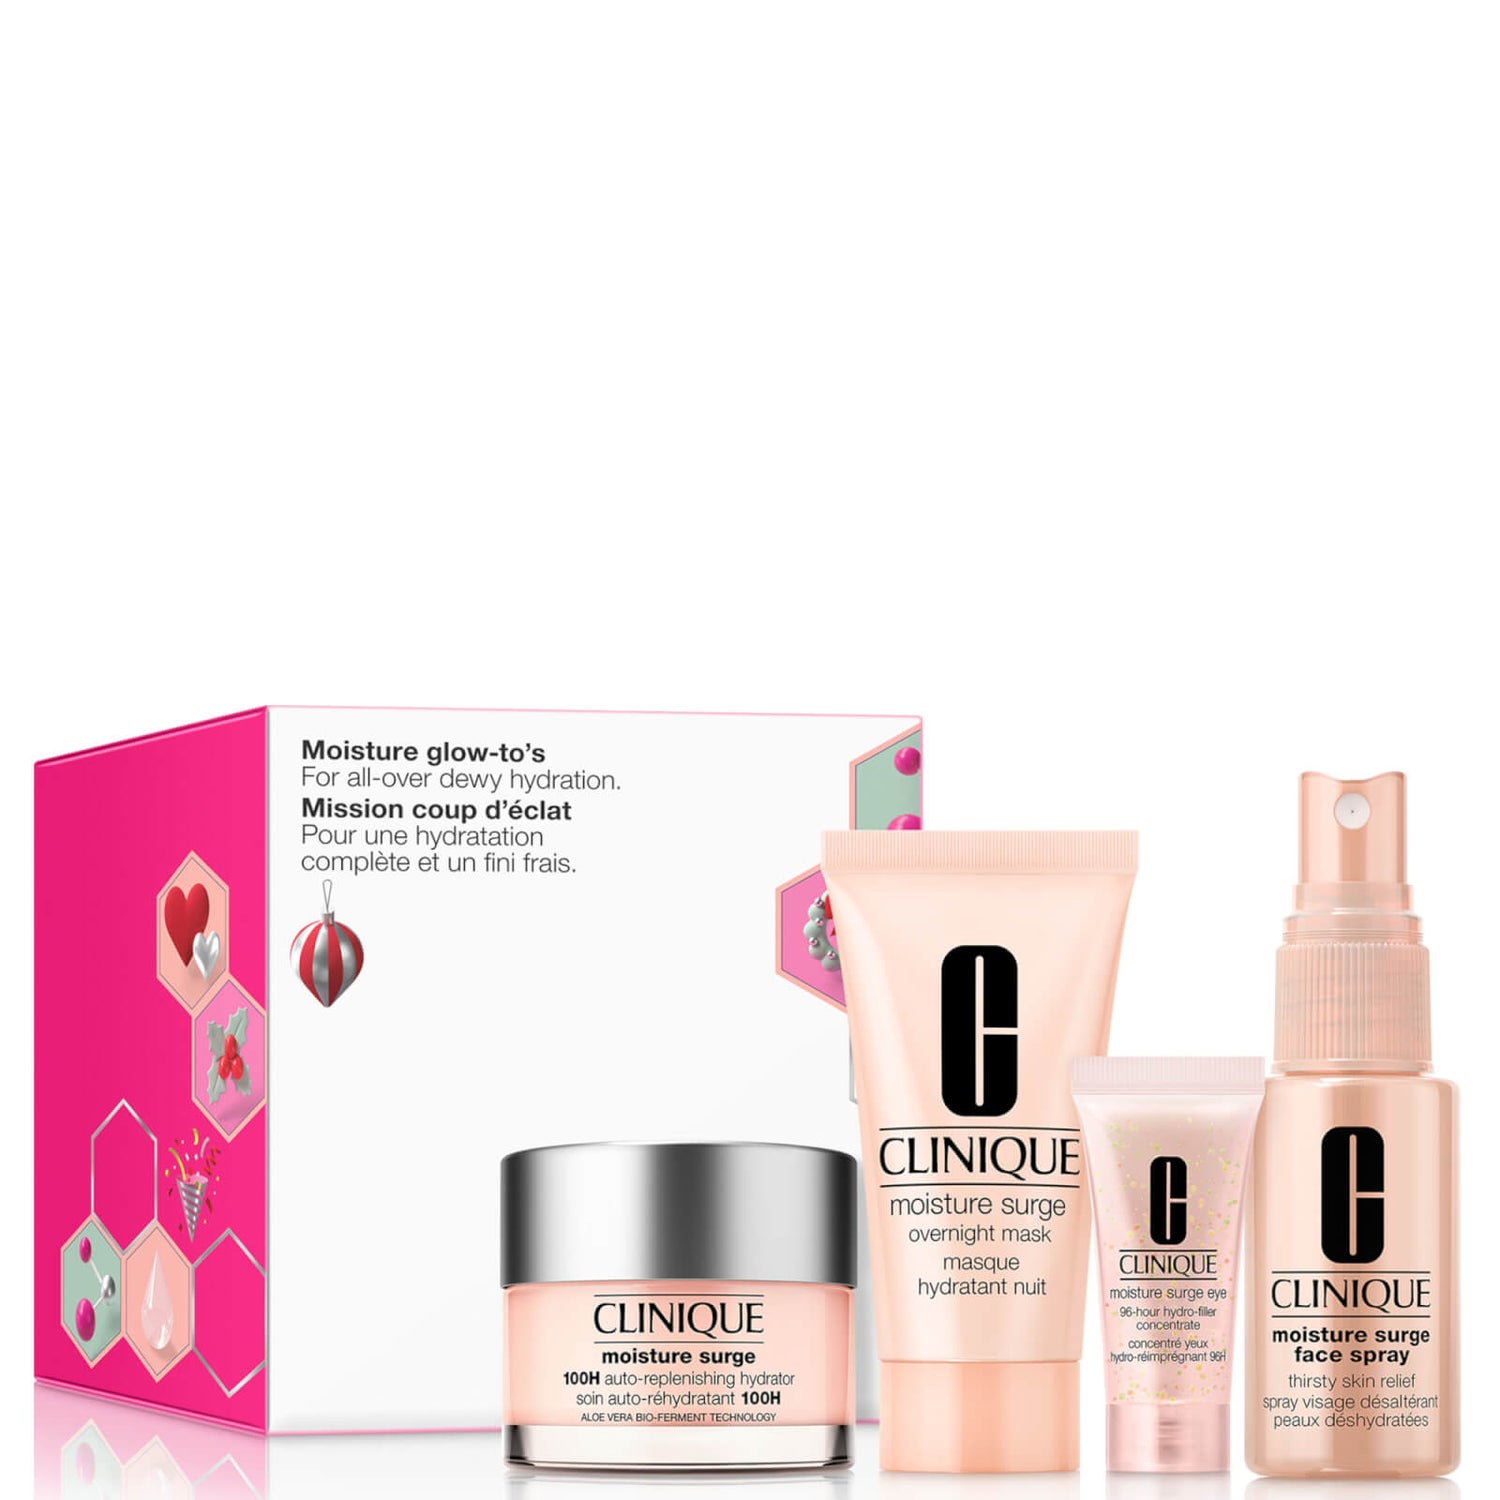 Clinique Moisture Glow-to's Set for All-Over Hydration (Worth $91.68)